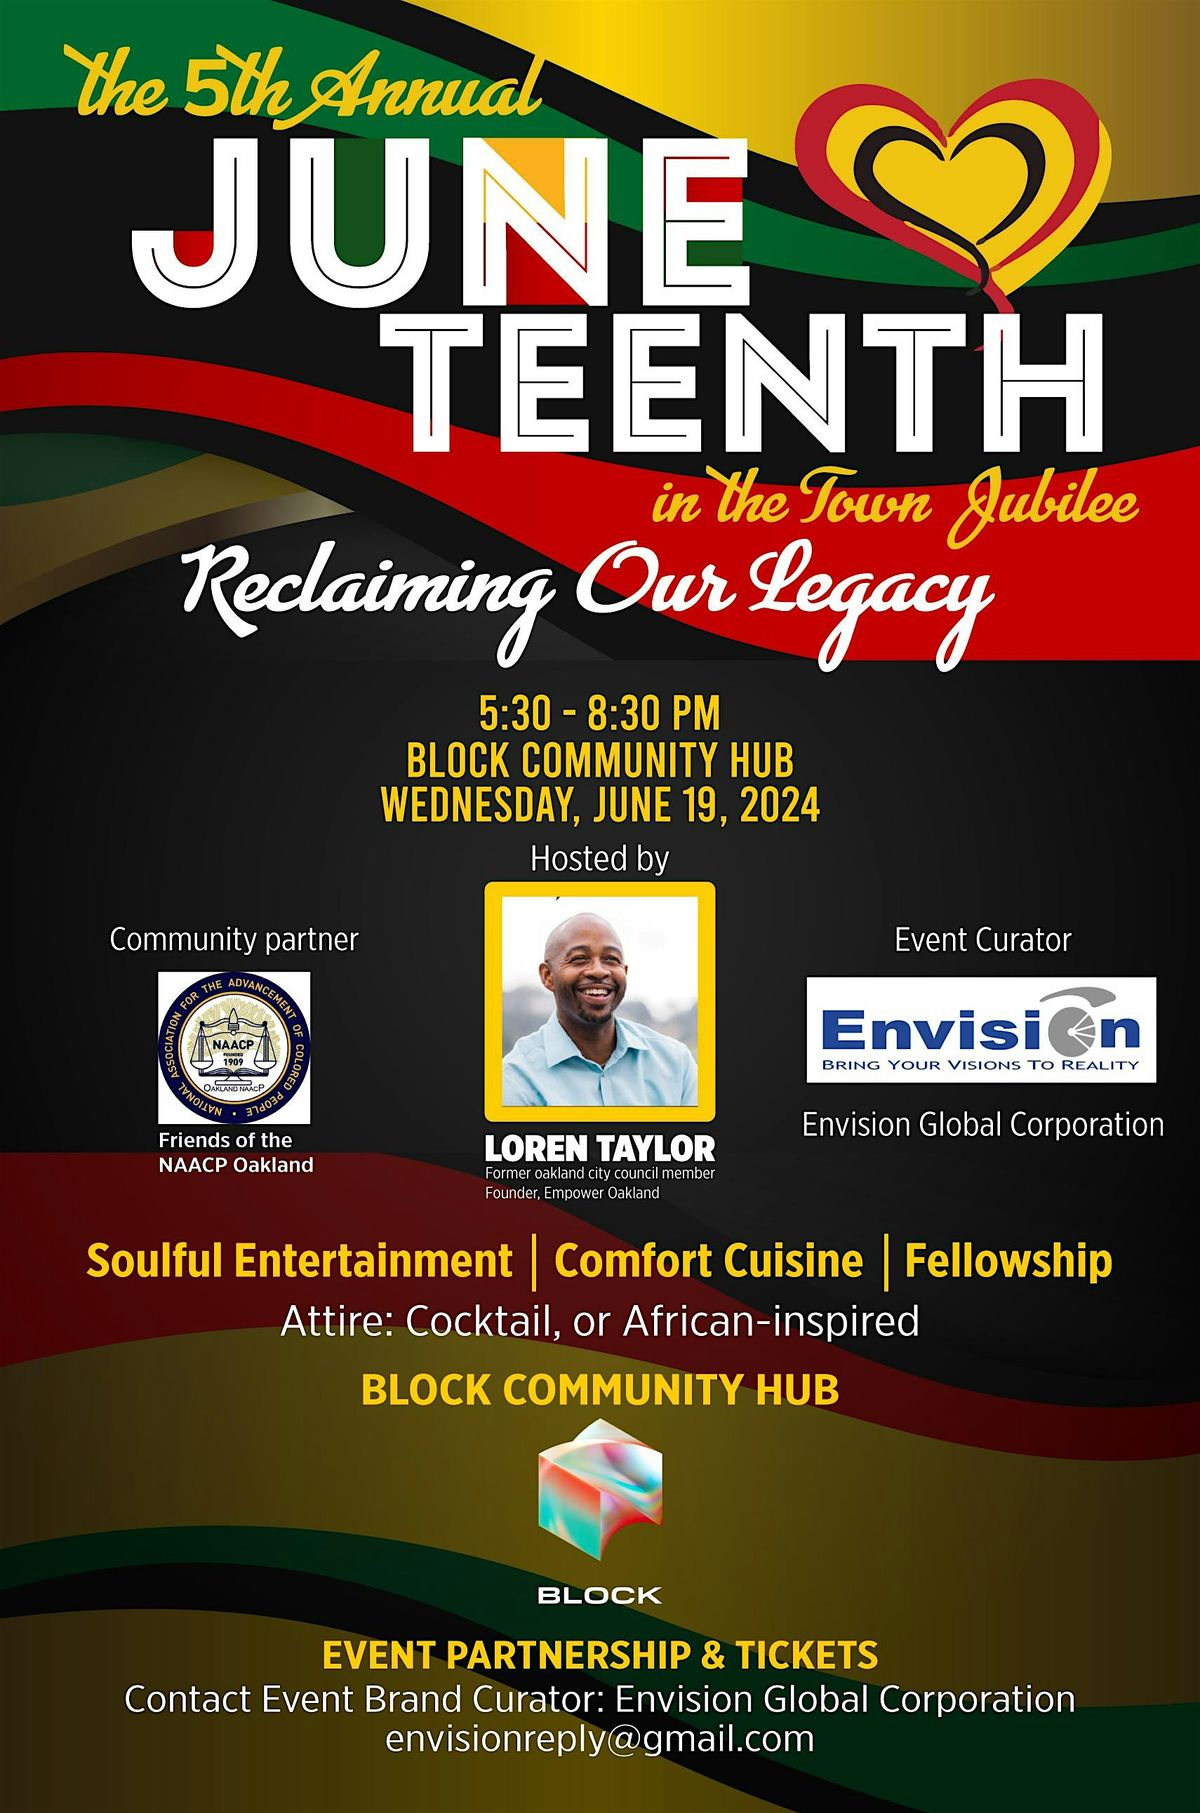 The 5th Annual Juneteenth in the Town Jubilee, hosted by Loren Taylor